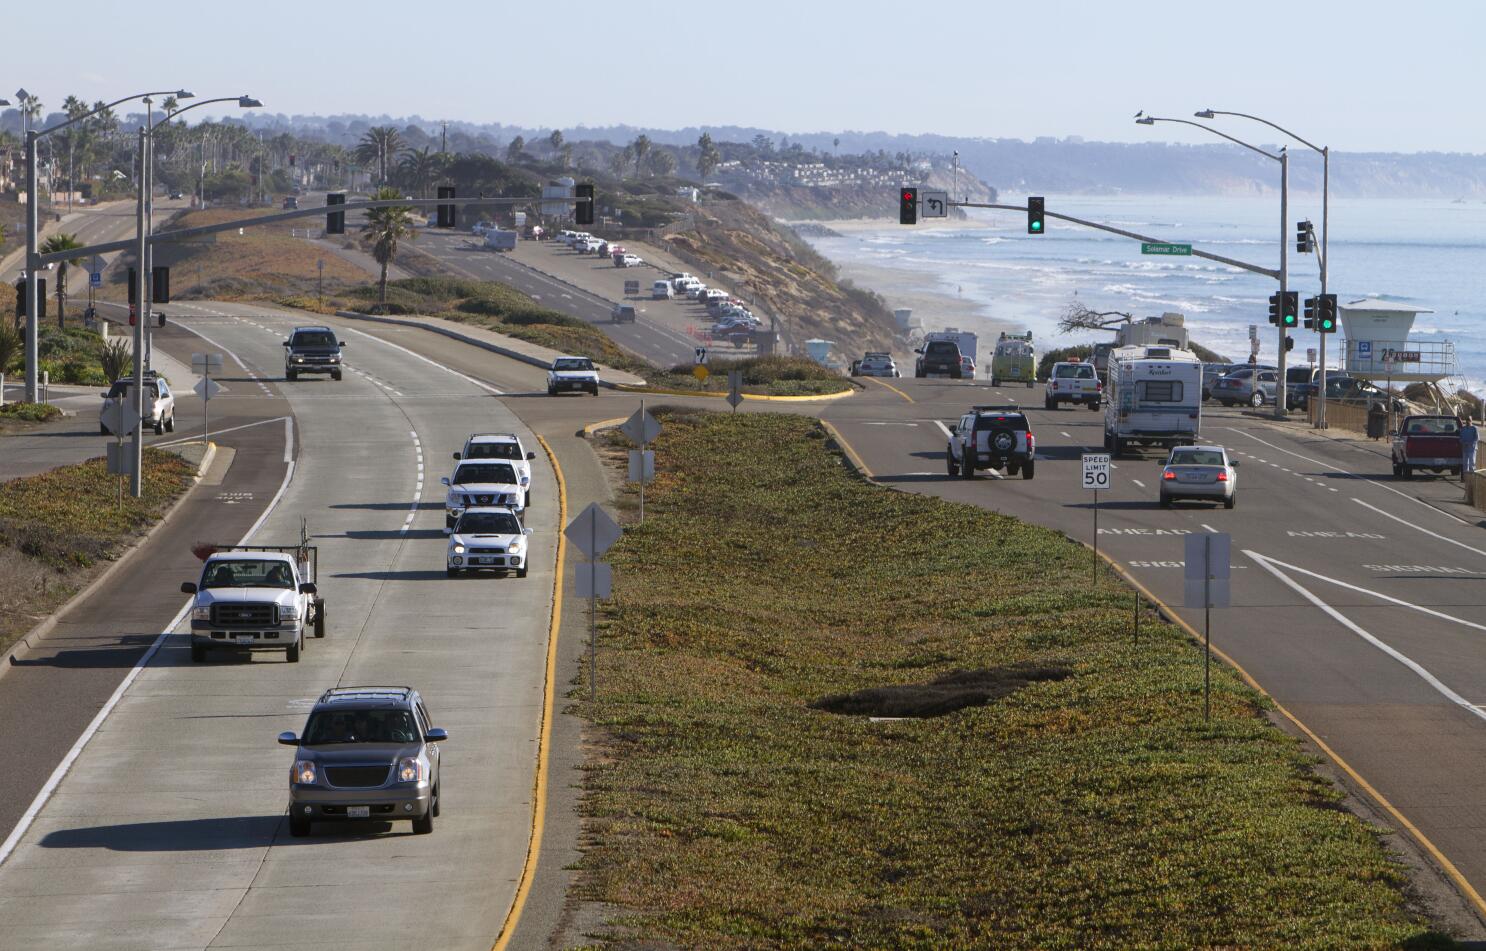 8-facts-about-transportation-and-infrastructure-in-carlsbad-california